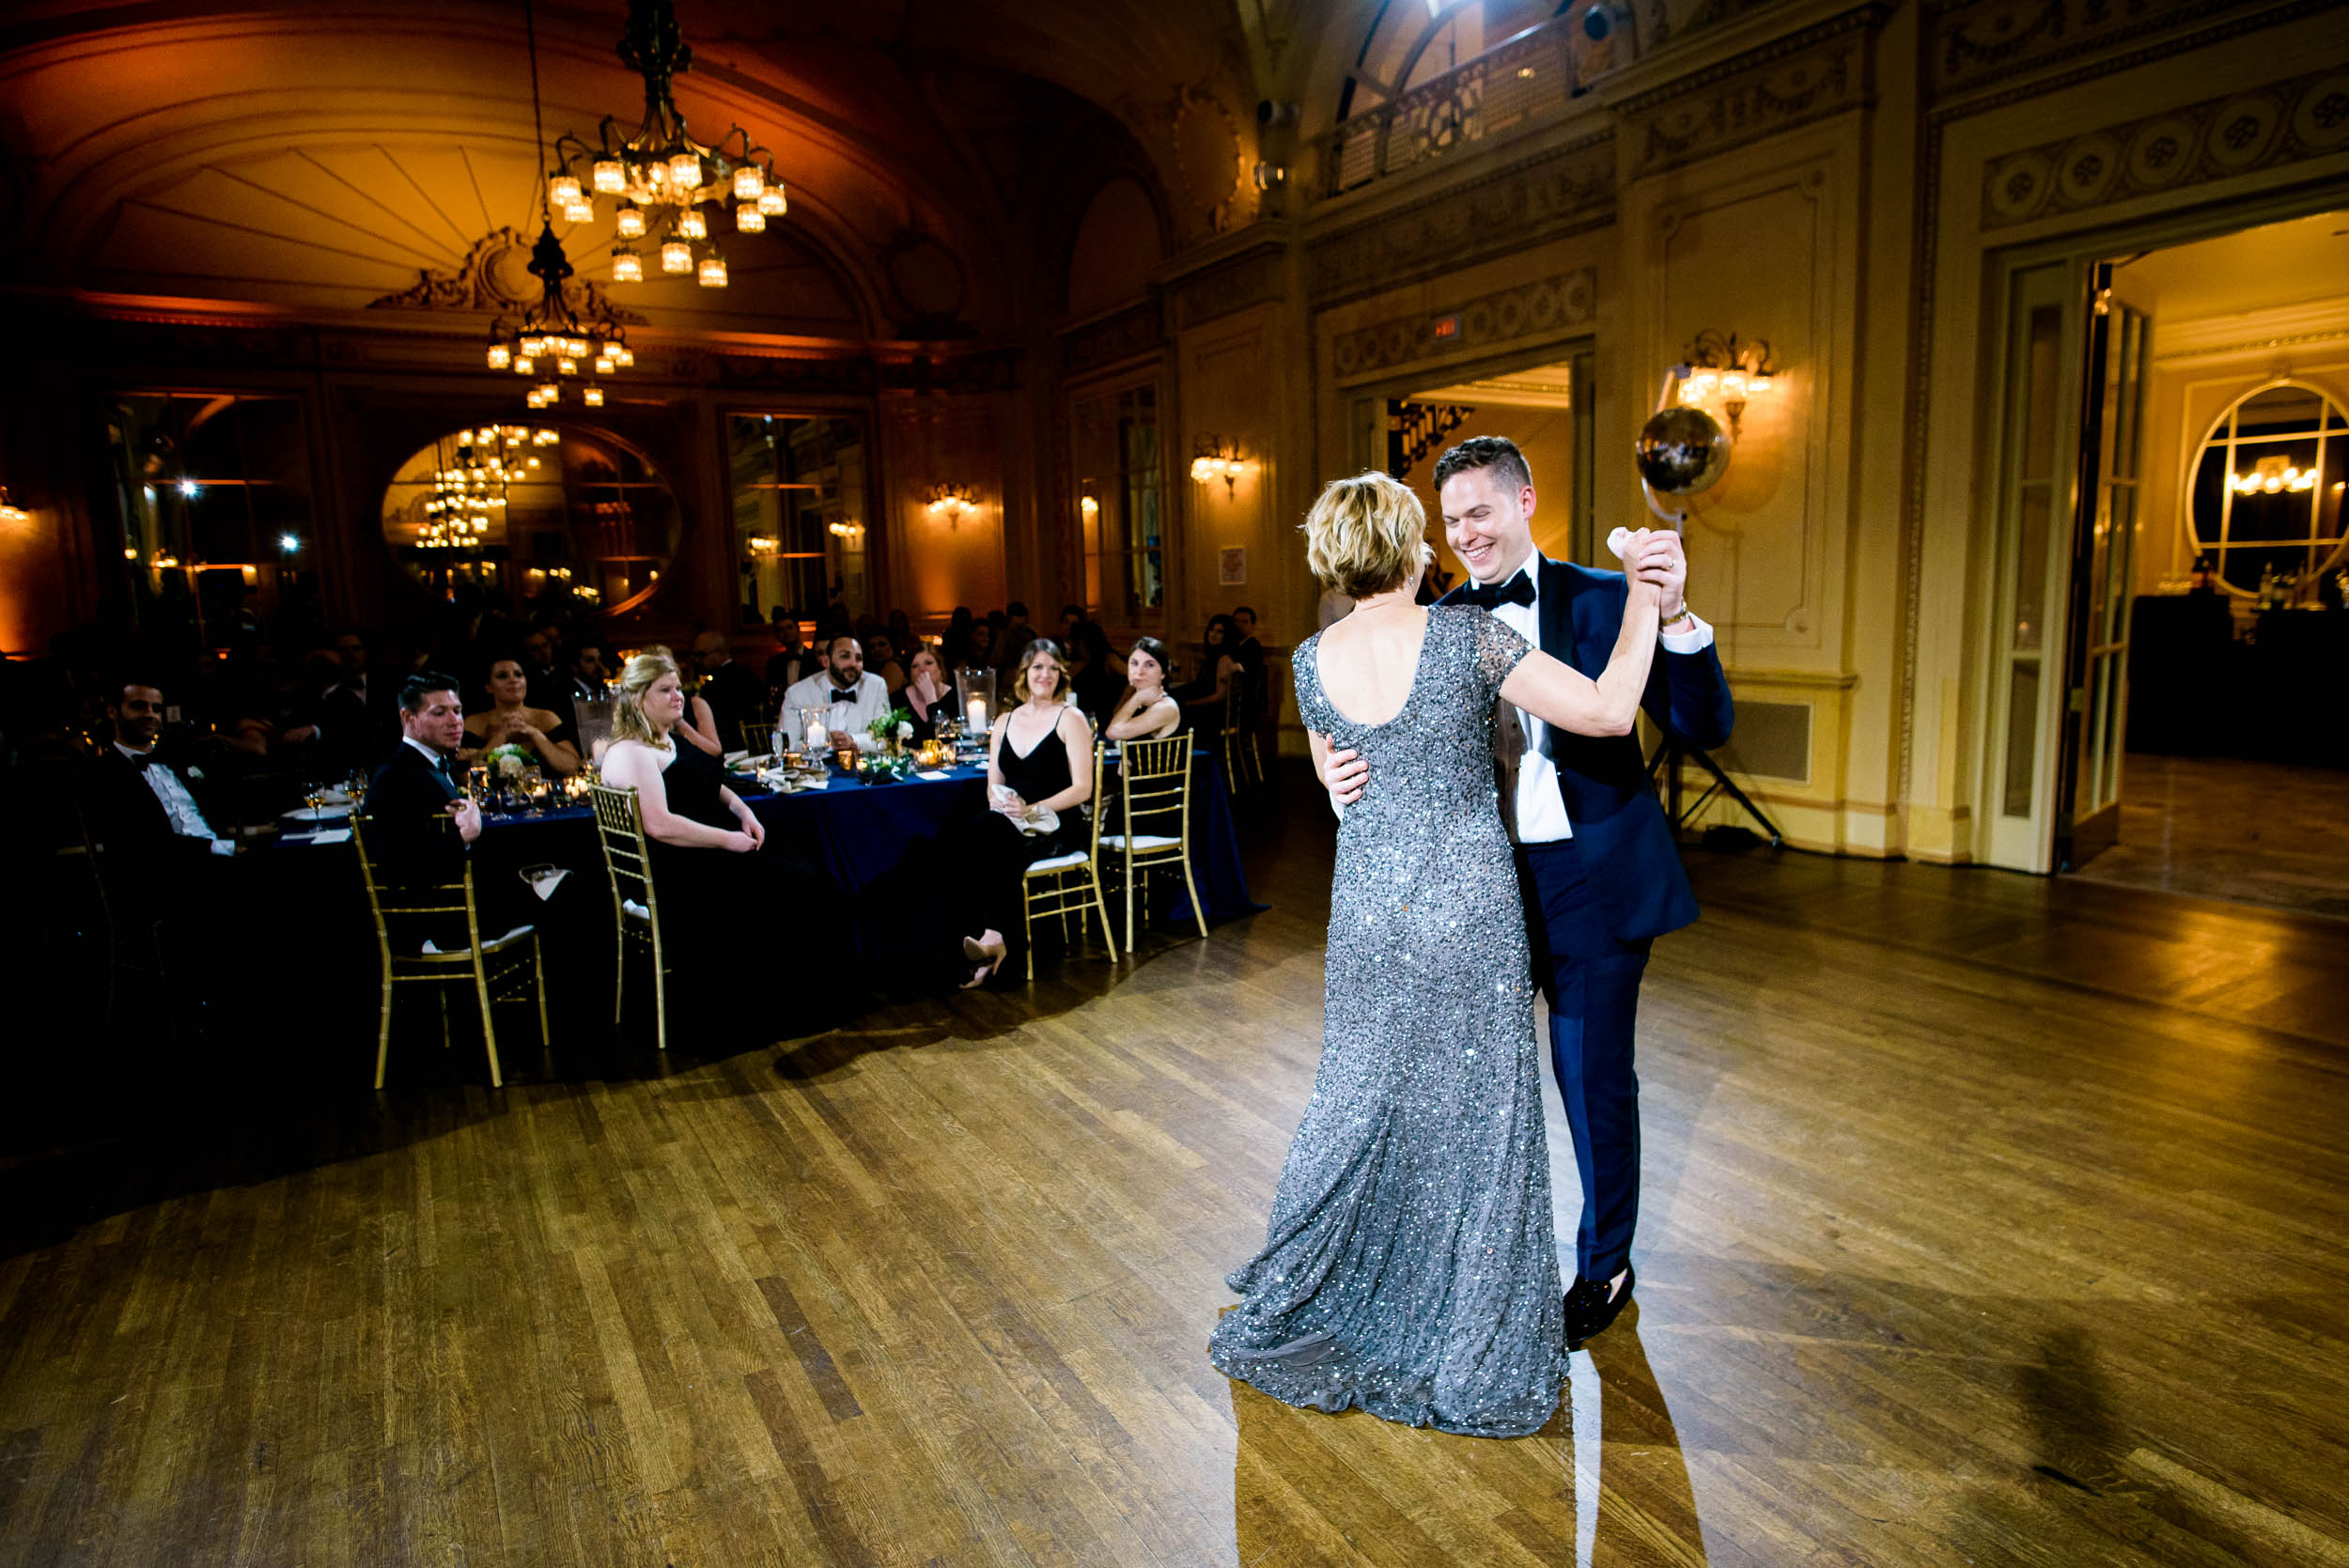 Mother and son dancing at luxurious fall wedding at the Chicago Symphony Center captured by J. Brown Photography. See more wedding ideas at jbrownphotography.com!